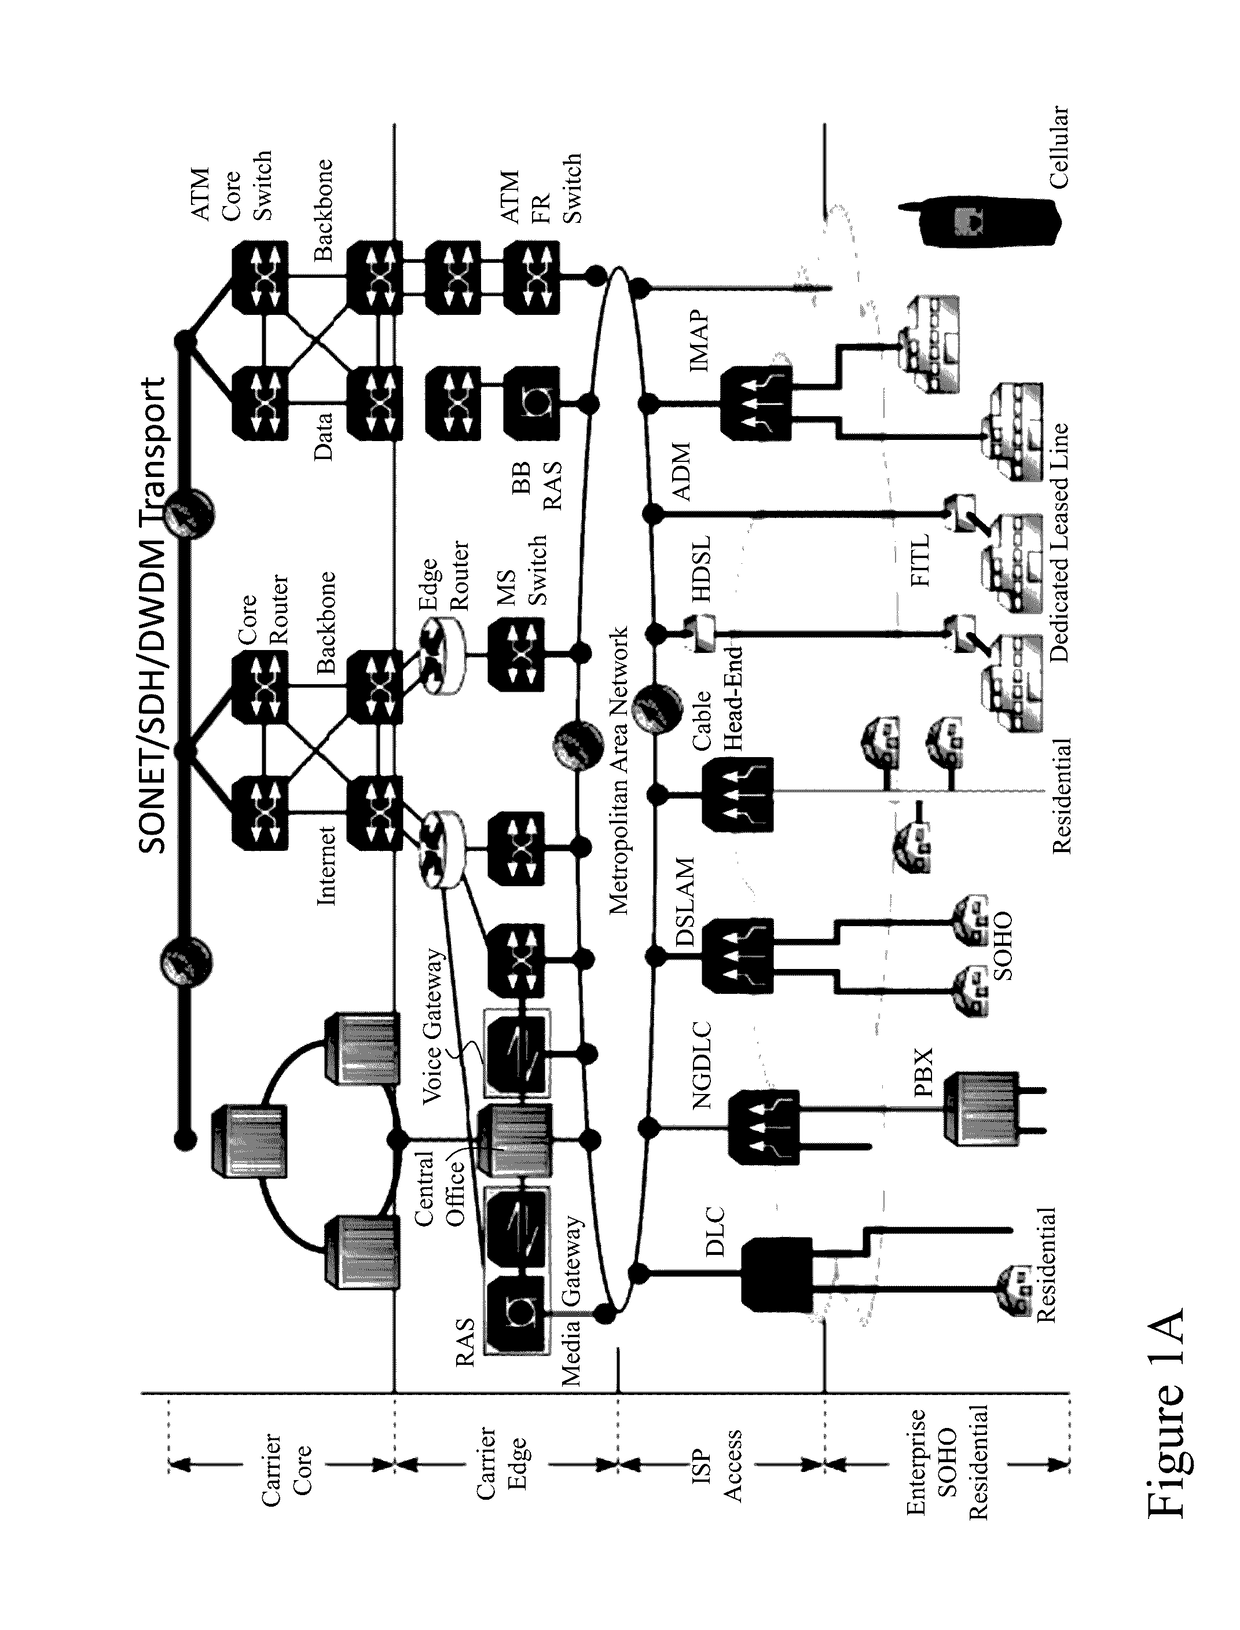 Optical interconnection methods and systems exploiting mode multiplexing